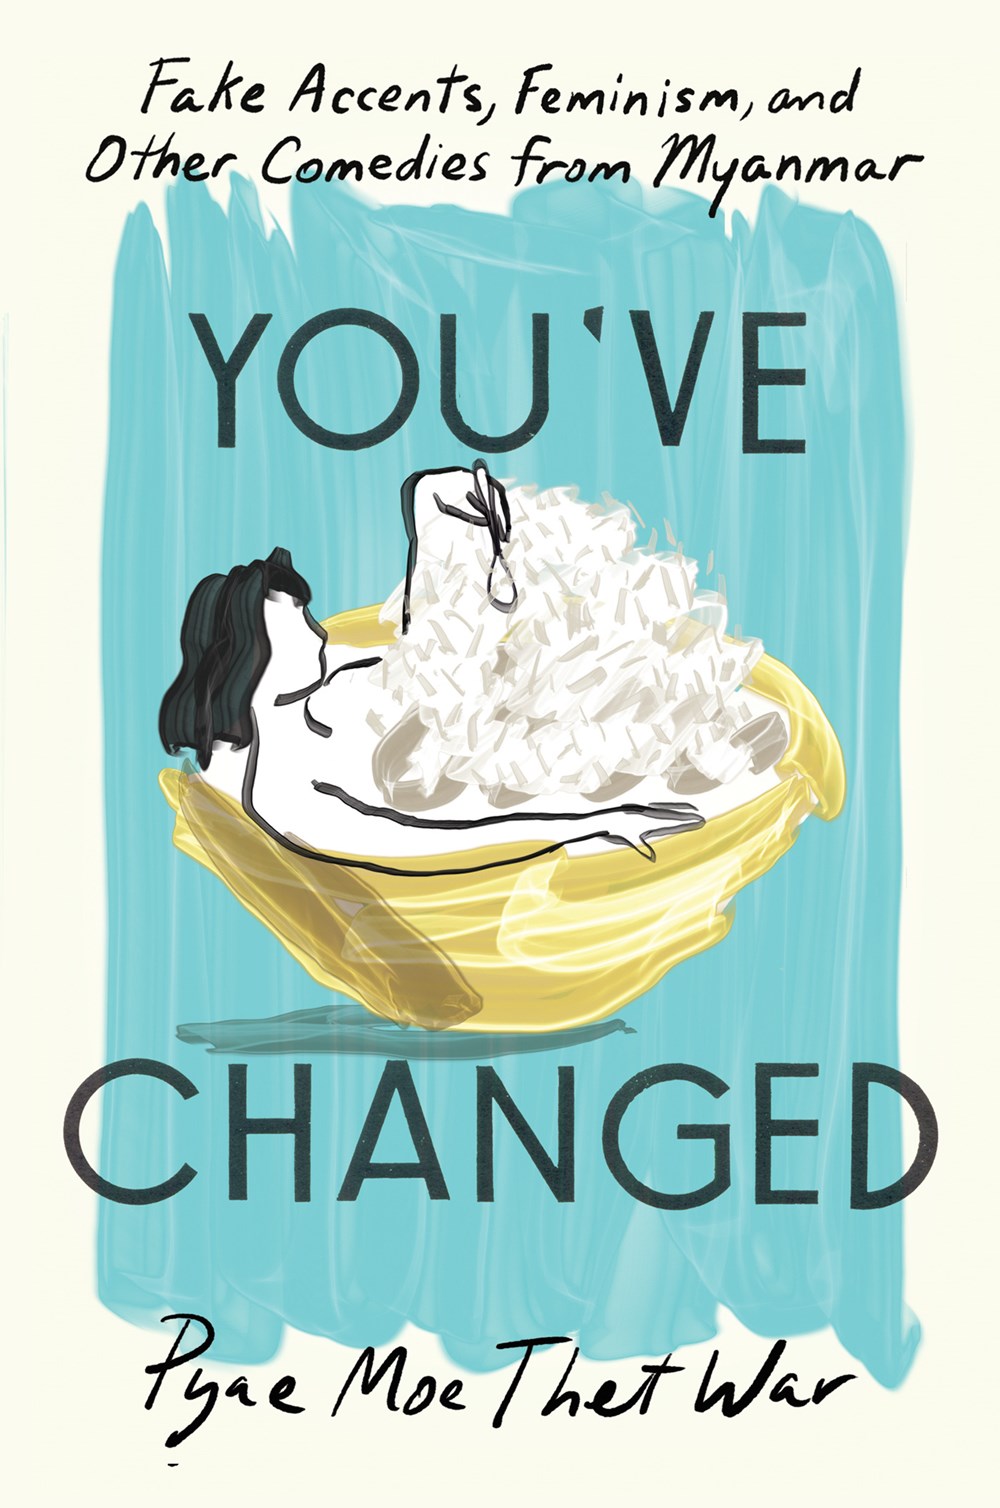 Image of "You've Changed: Fake Accents, Feminism, and Other Comedies from Myanmar"